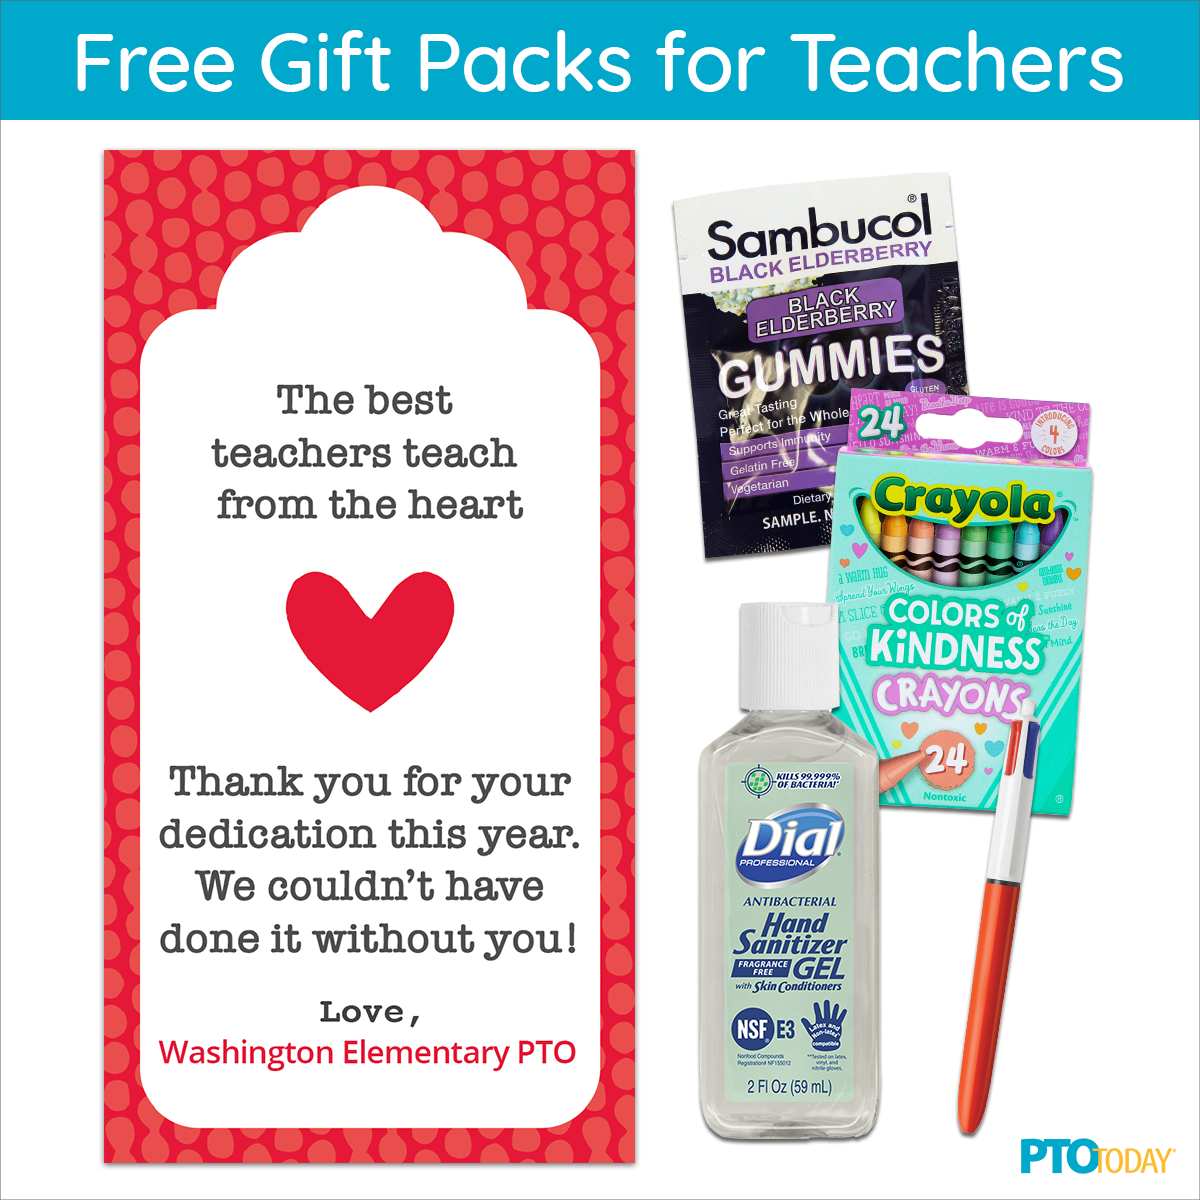 Sign up for a chance at free gift packs for teachers